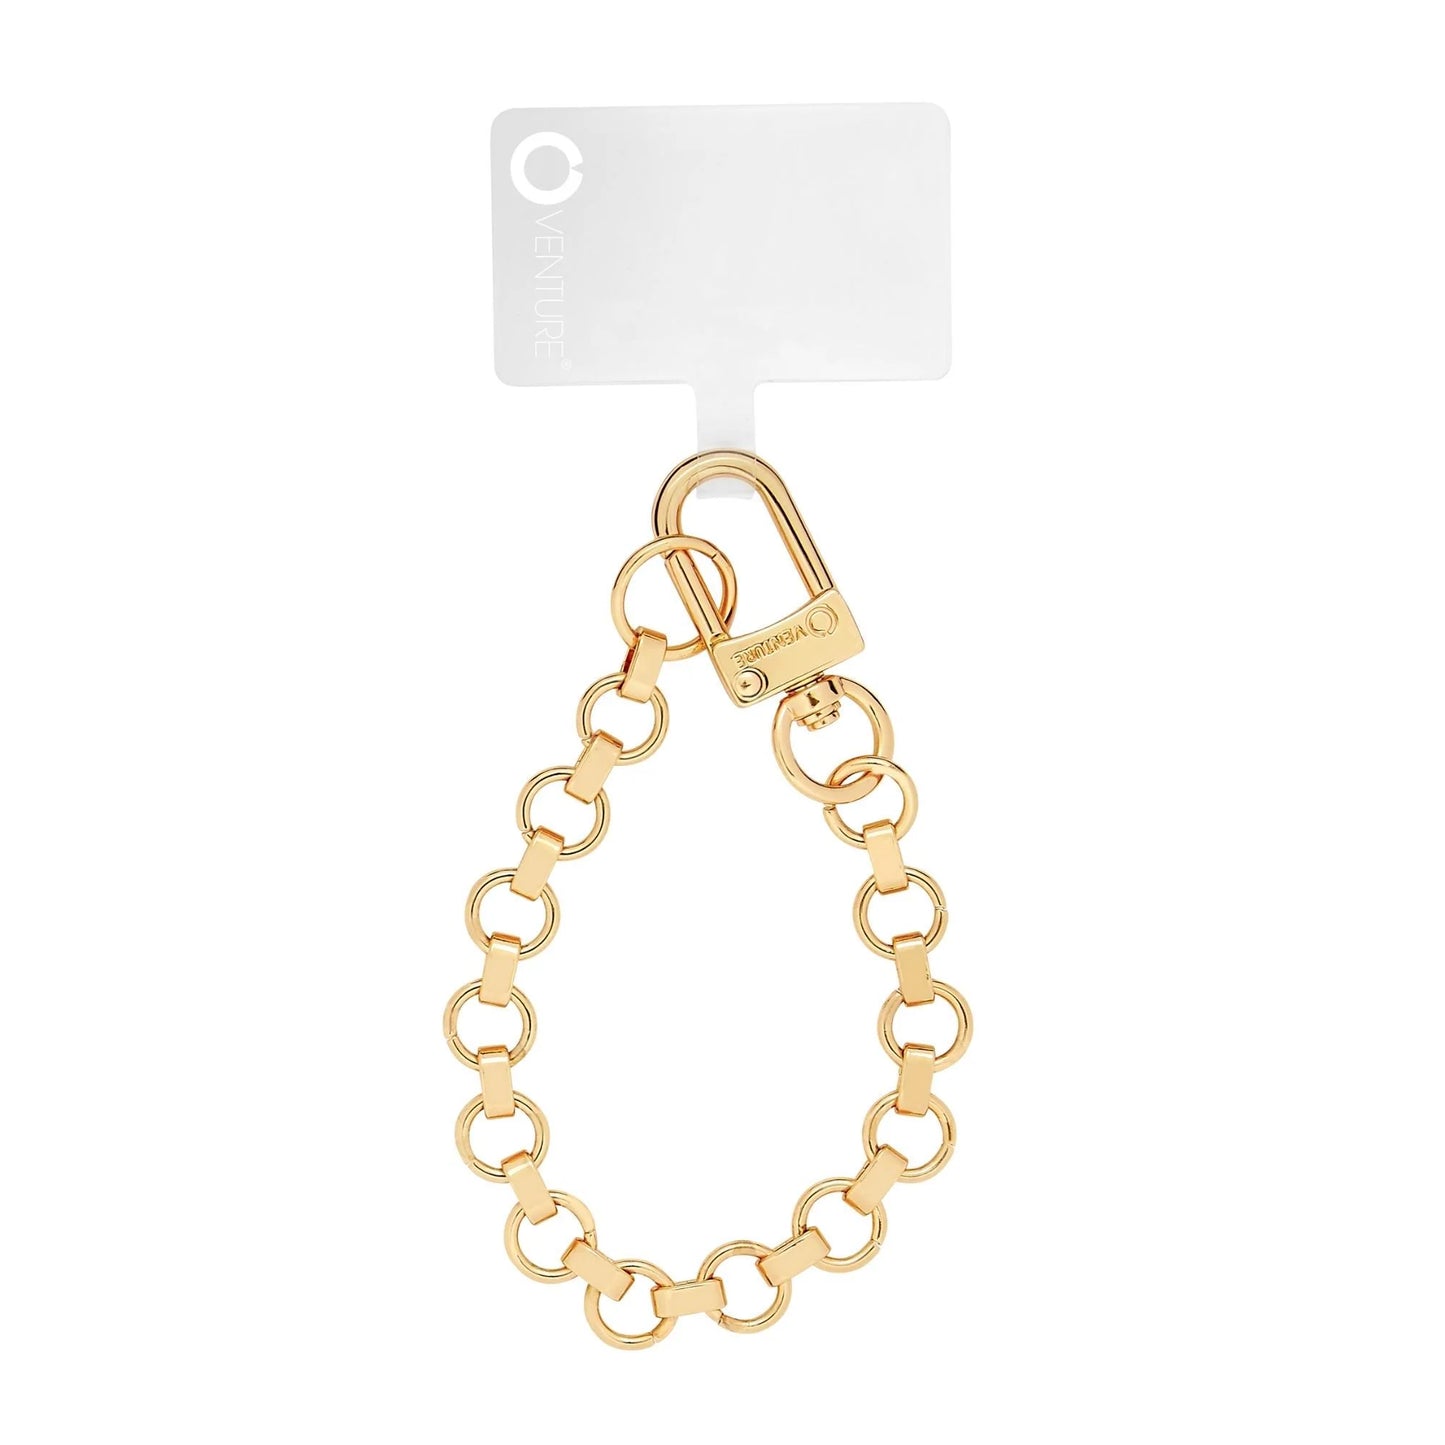 The Hook Me Up™ Chain Wristlet